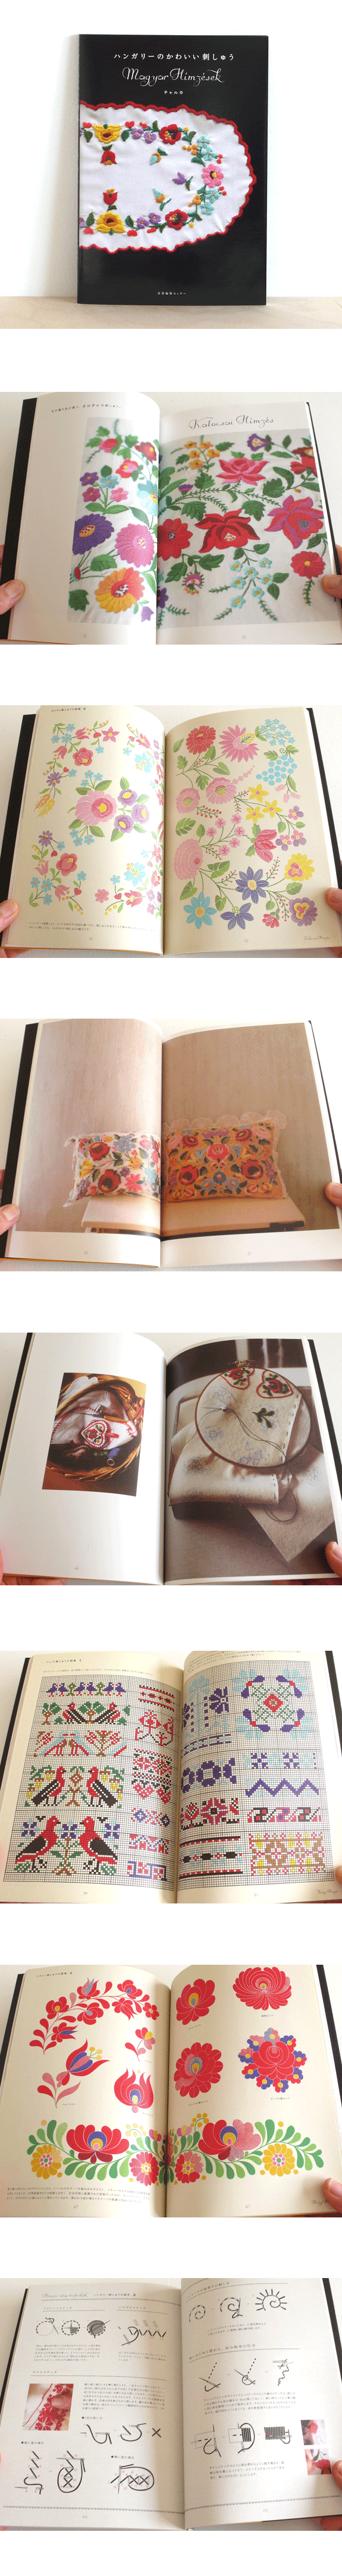 hungarian embroidery japanese craft book [beautiful embroidery, beautiful sewing, unusual embroidery]